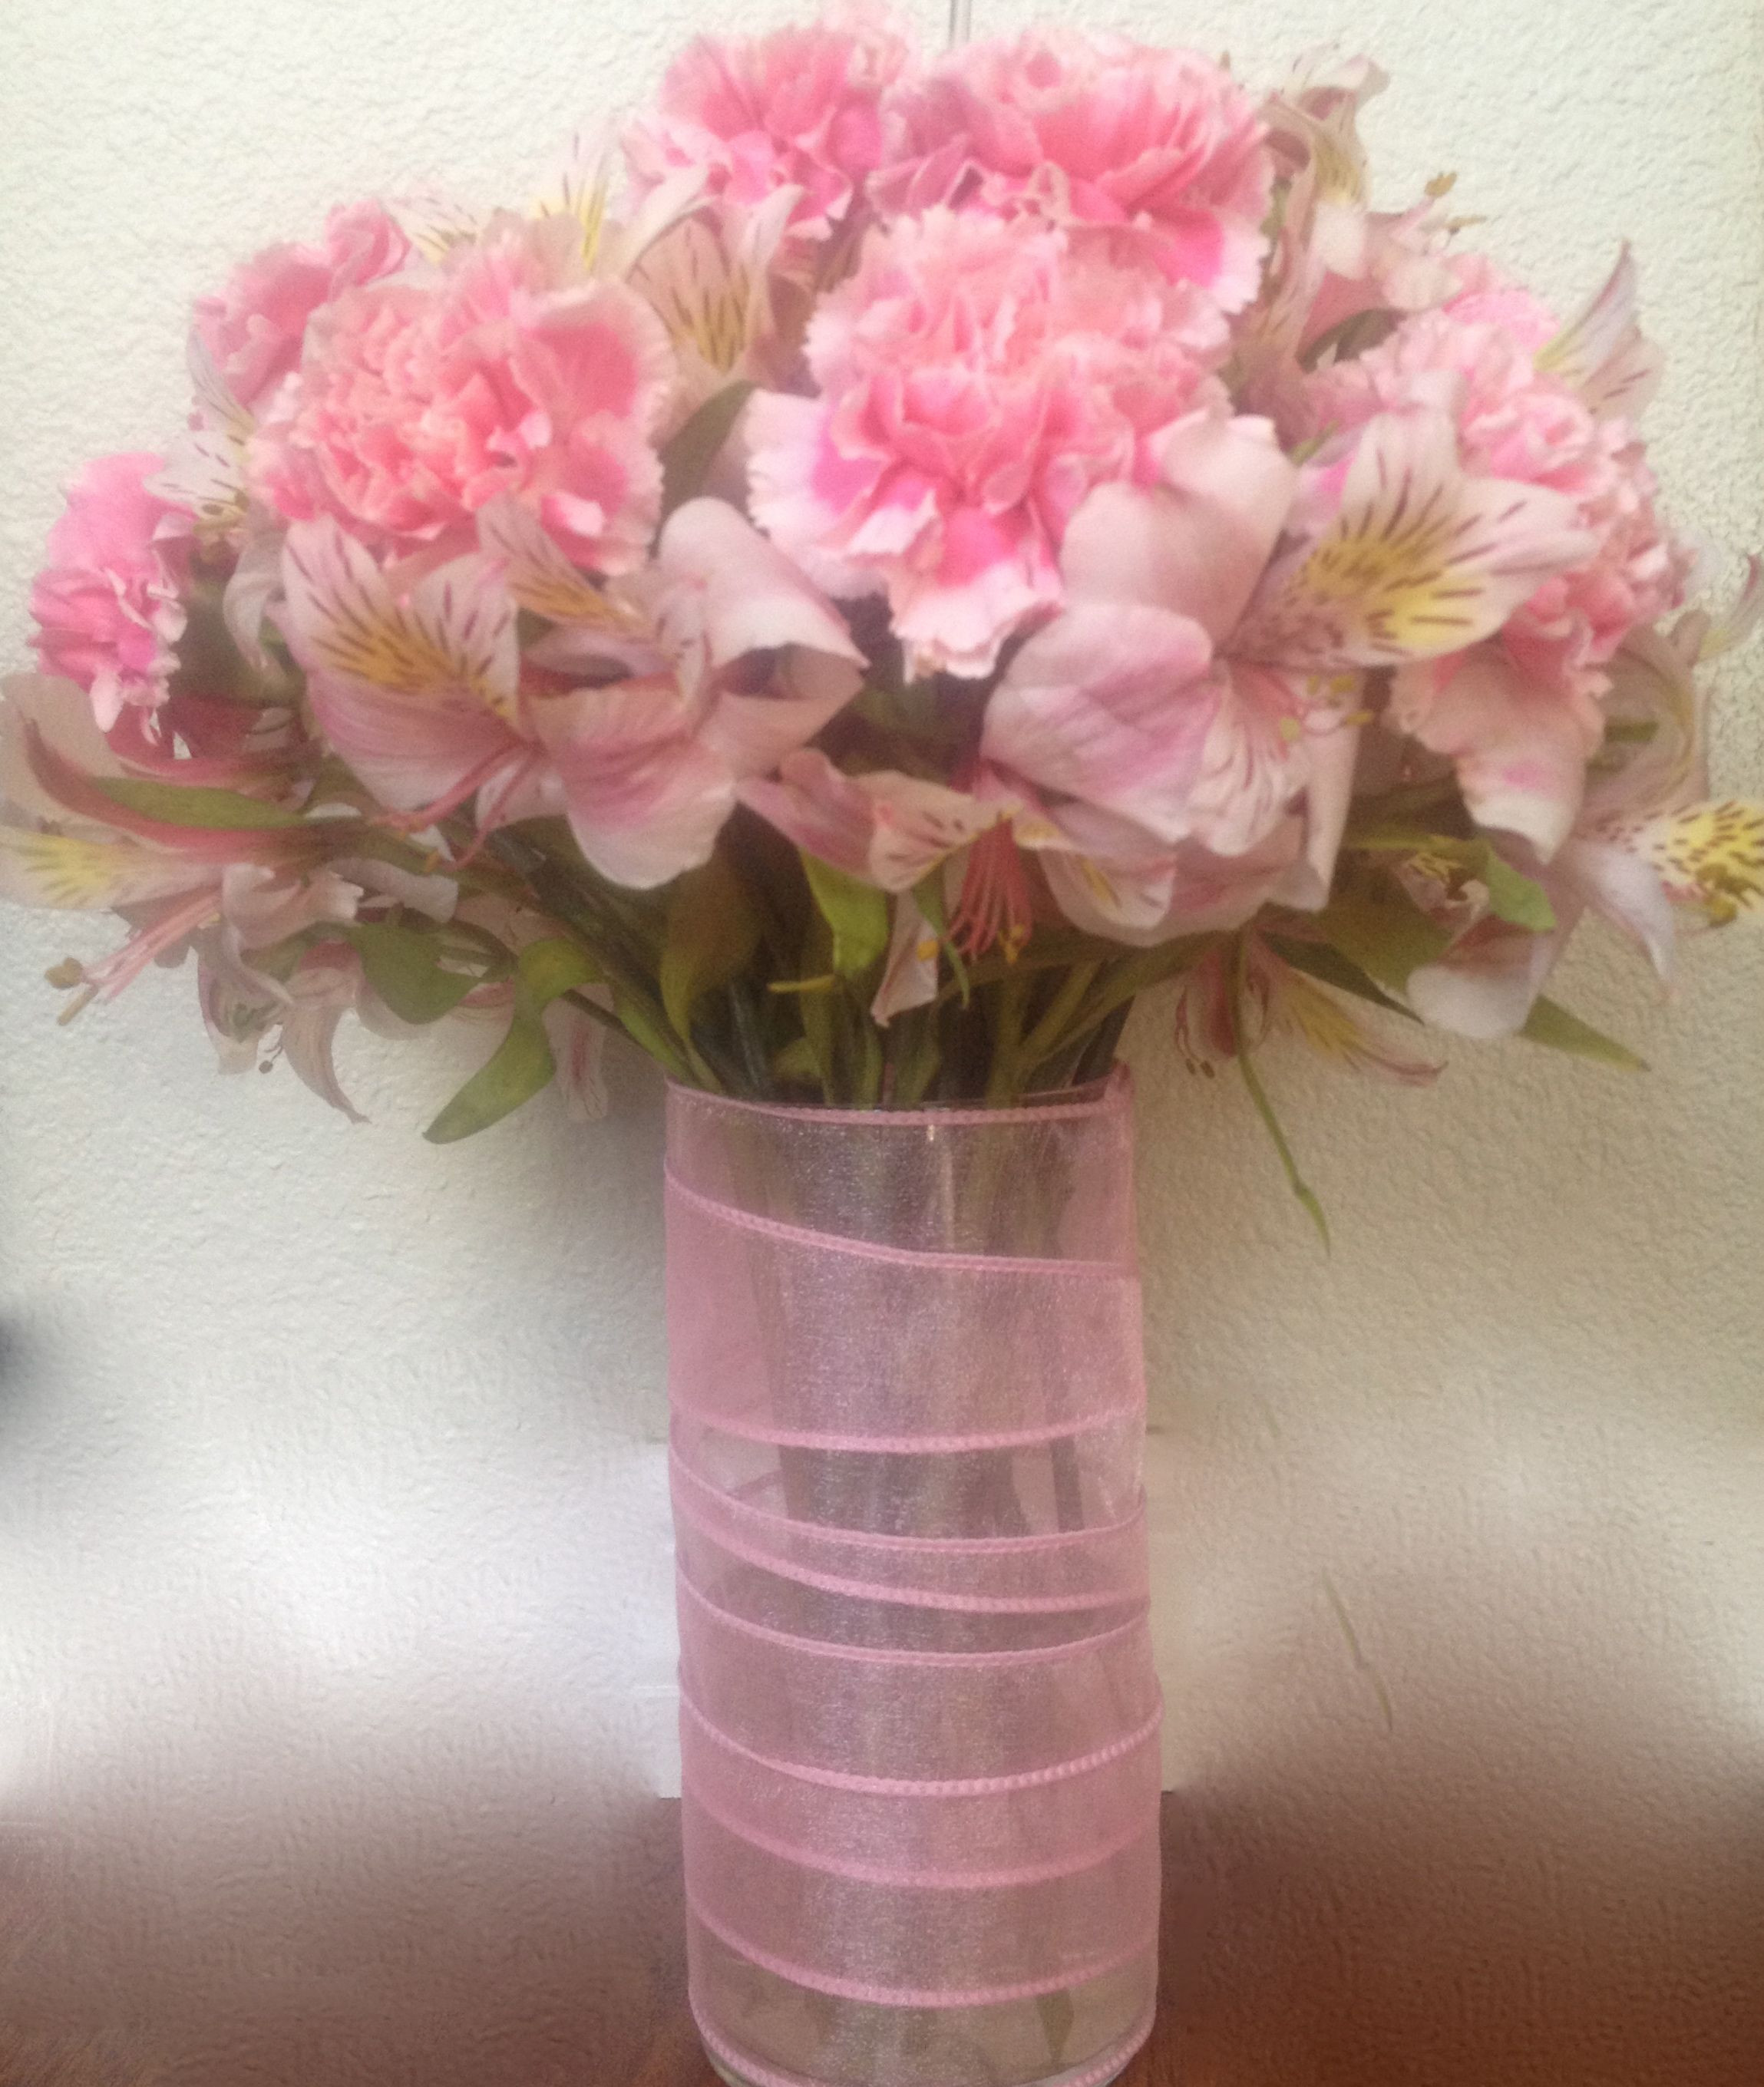 29 attractive Rhinestone Vases wholesale 2024 free download rhinestone vases wholesale of its a girl pink carnations alstroemeria in a glass vase wrapped inside pink carnations alstroemeria in a glass vase wrapped in pink ribbon